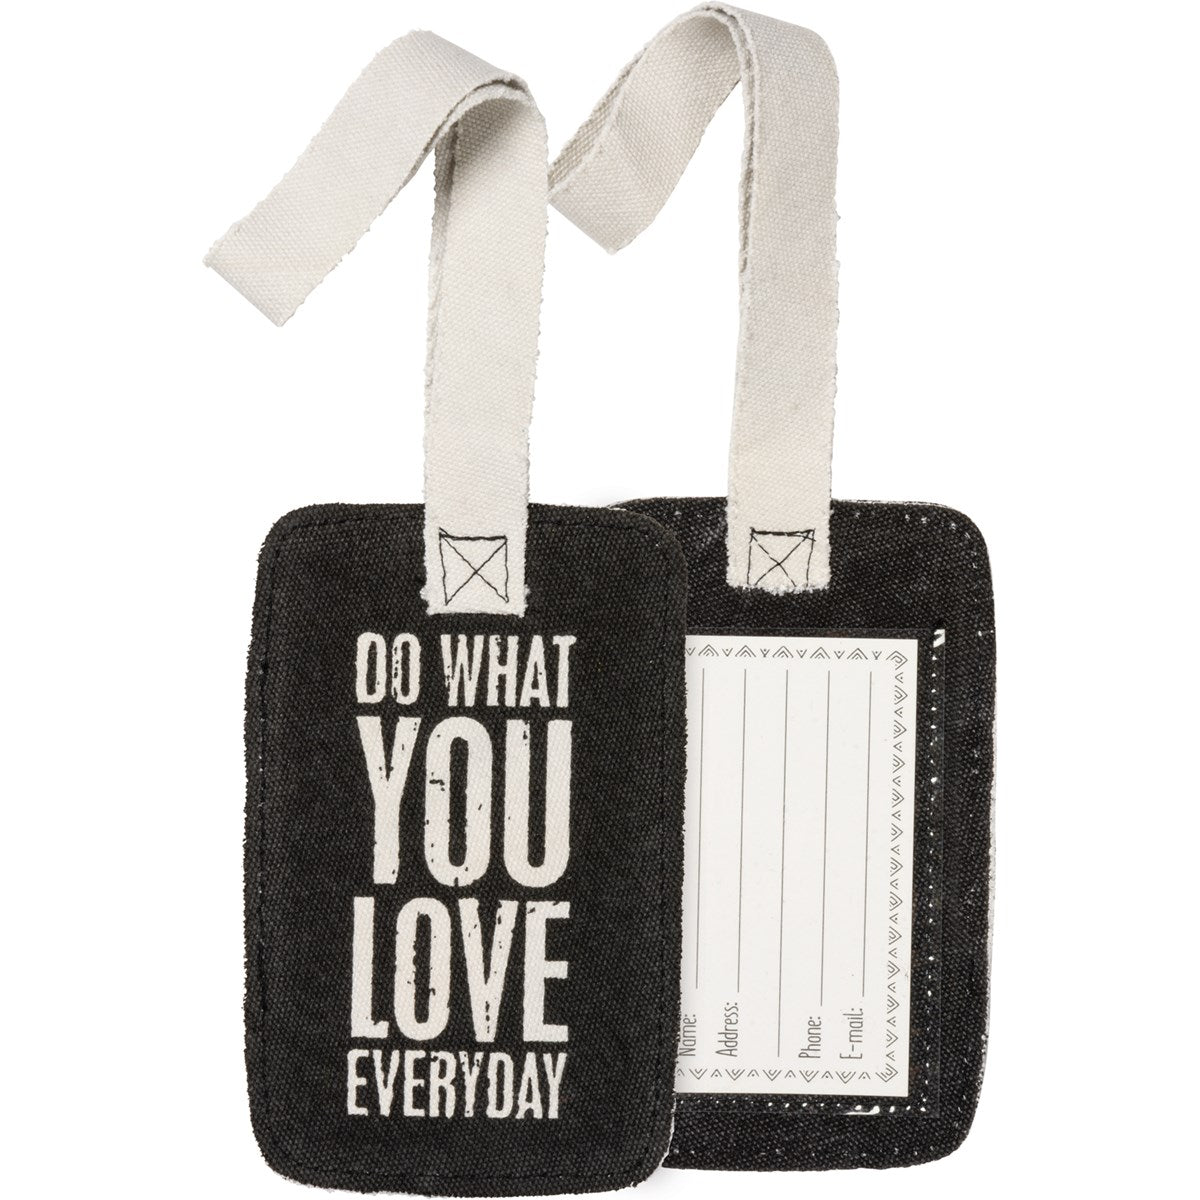 Luggage tag what you love